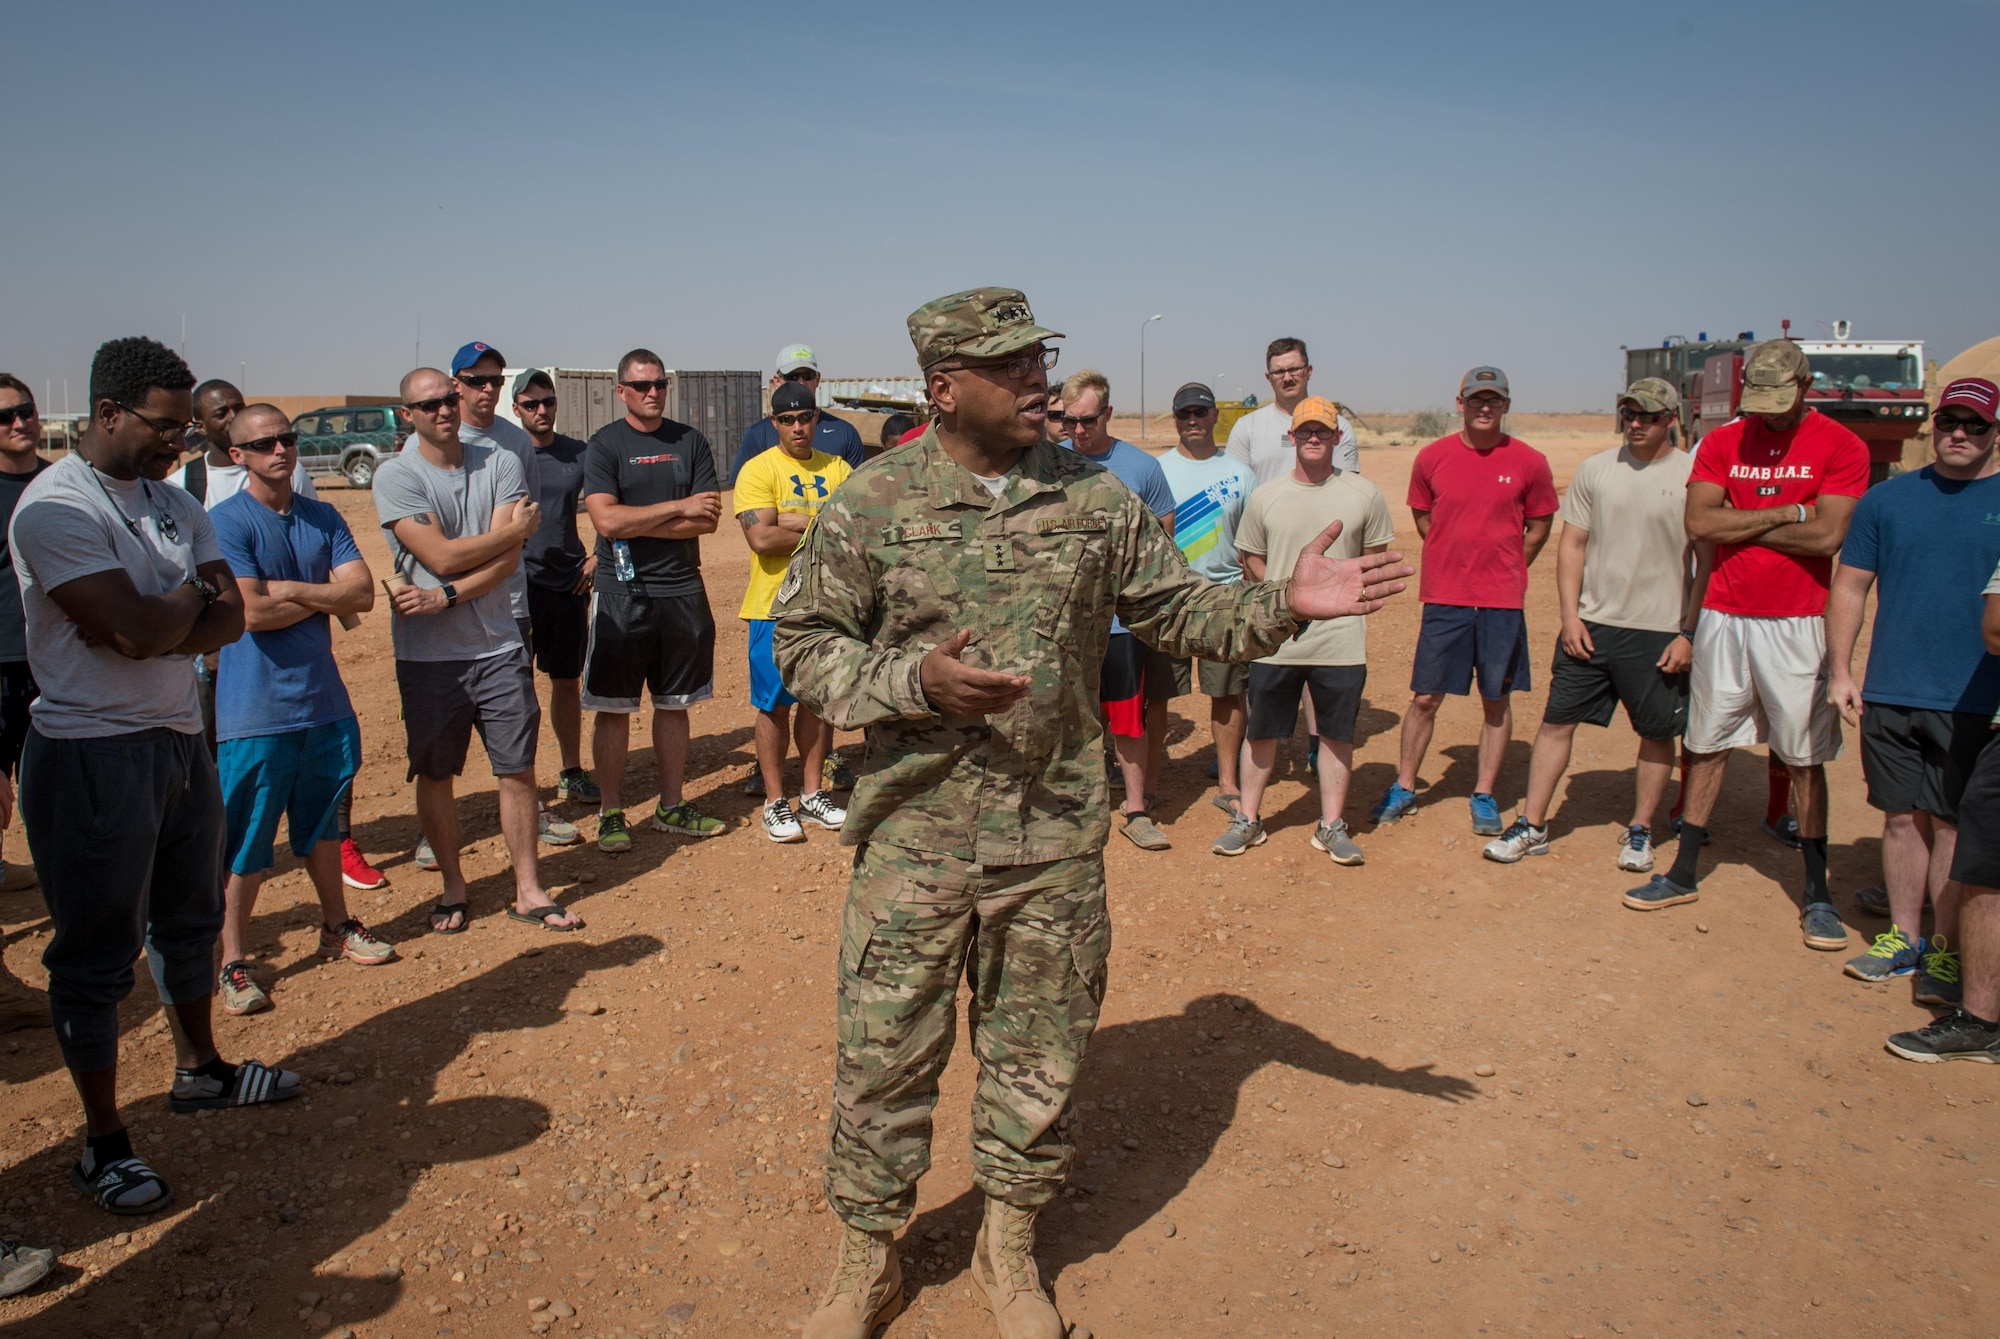 Lt. Gen. Richard Clark, 17th Expeditionary Air Force commander, speaks to Airmen assigned the 724th Expeditionary Air Base Squadron at Air Base 201 in Agadez, Niger, during a visit Nov. 24, 2016. During a three day trip, Clark visited Airmen in Europe and Africa who support the Air Force's intelligence, surveillance and reconnaissance mission. This was Clark's first visit to NAS Sigonella, Niamey and Agadez as 3rd Air Force commander. (U.S. Air Force photo by Tech. Sgt. Ryan Crane)